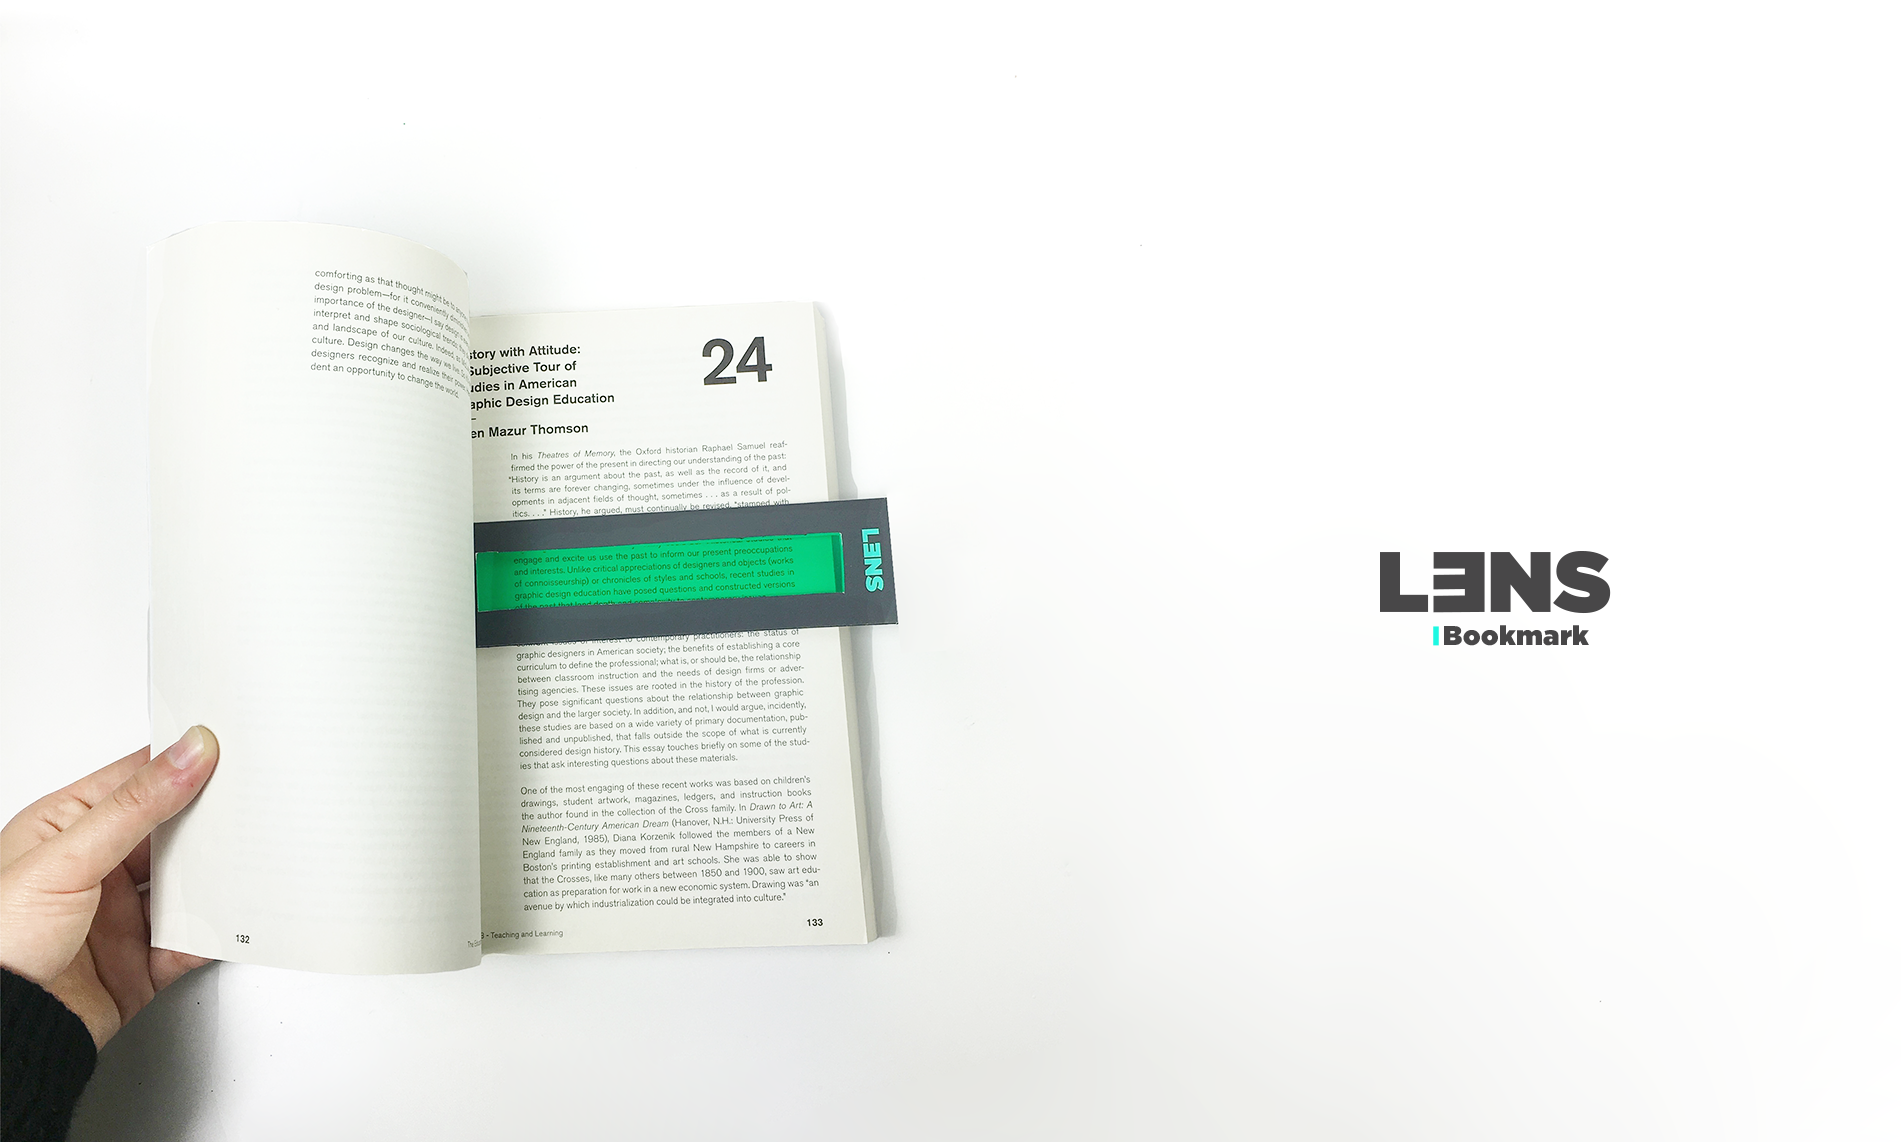 lens bookmark demo with a book